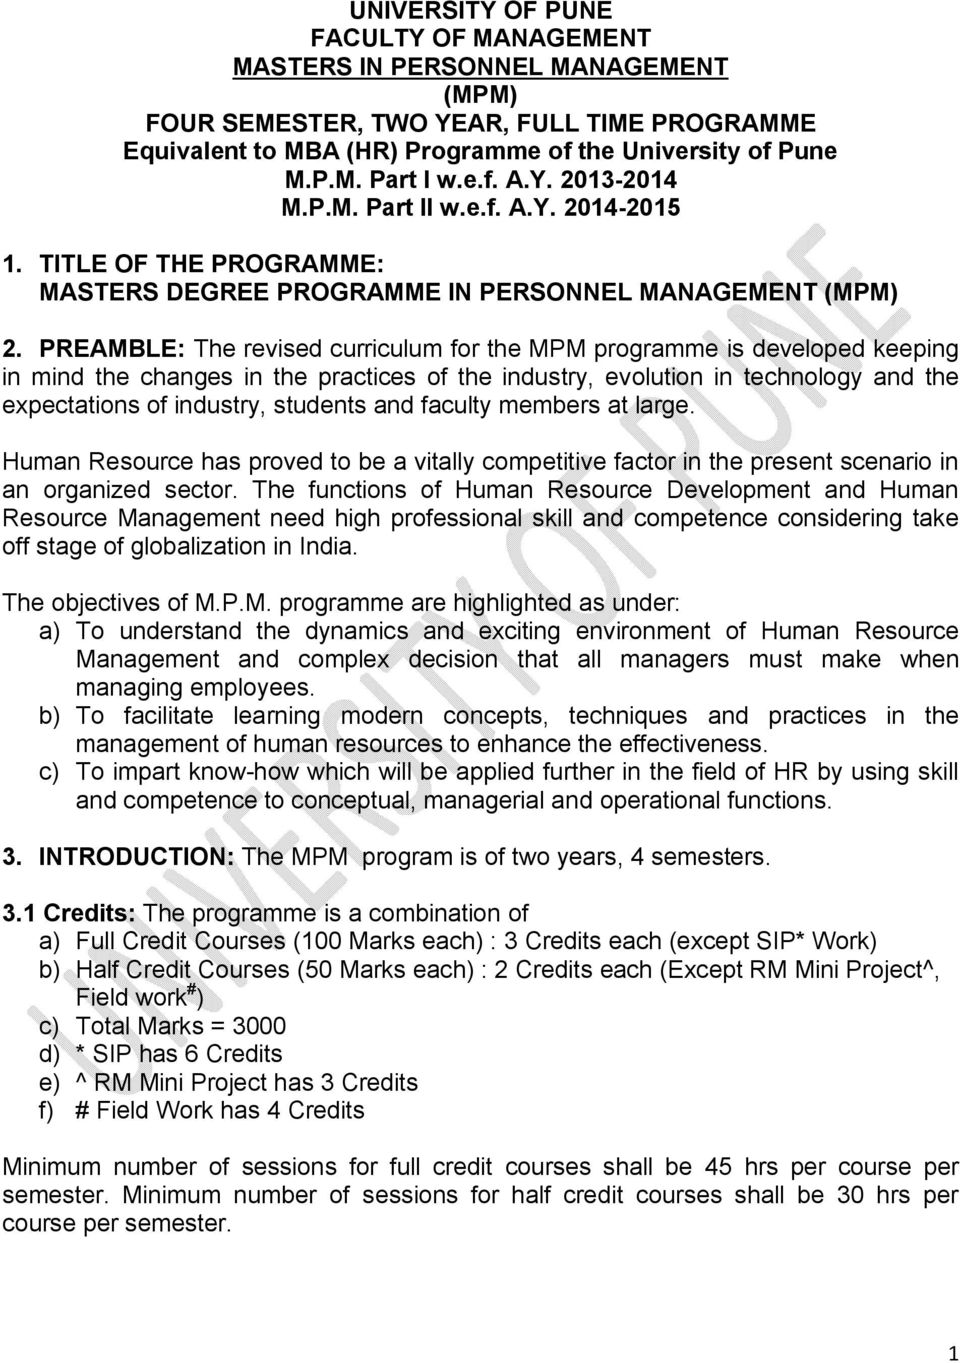 PREAMBLE: The revised curriculum for the MPM programme is developed keeping in mind the changes in the practices of the industry, evolution in technology and the expectations of industry, students